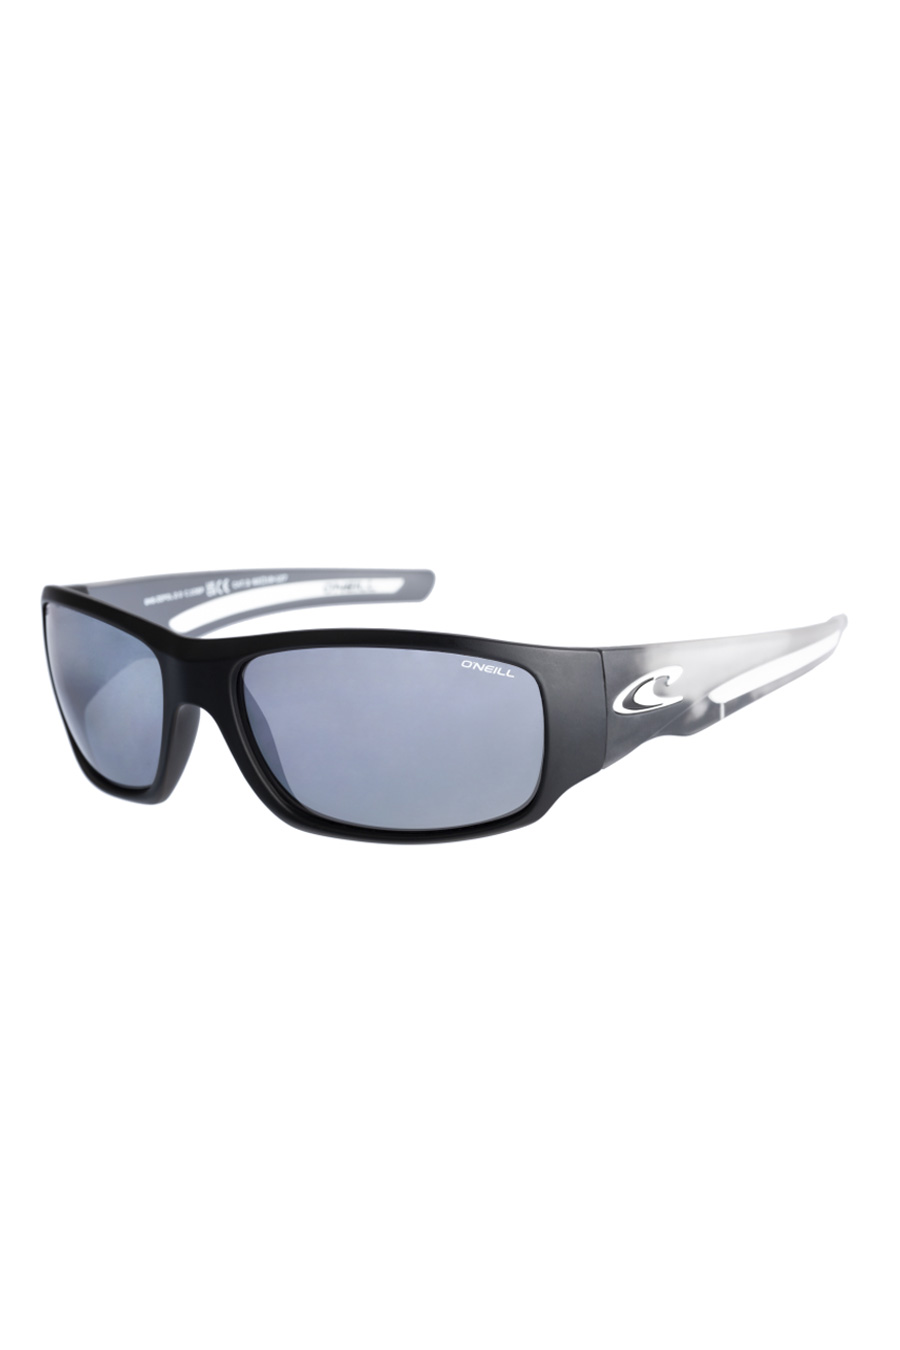 Saulesbrilles ONEILL ONS-ZEPOL20-108P